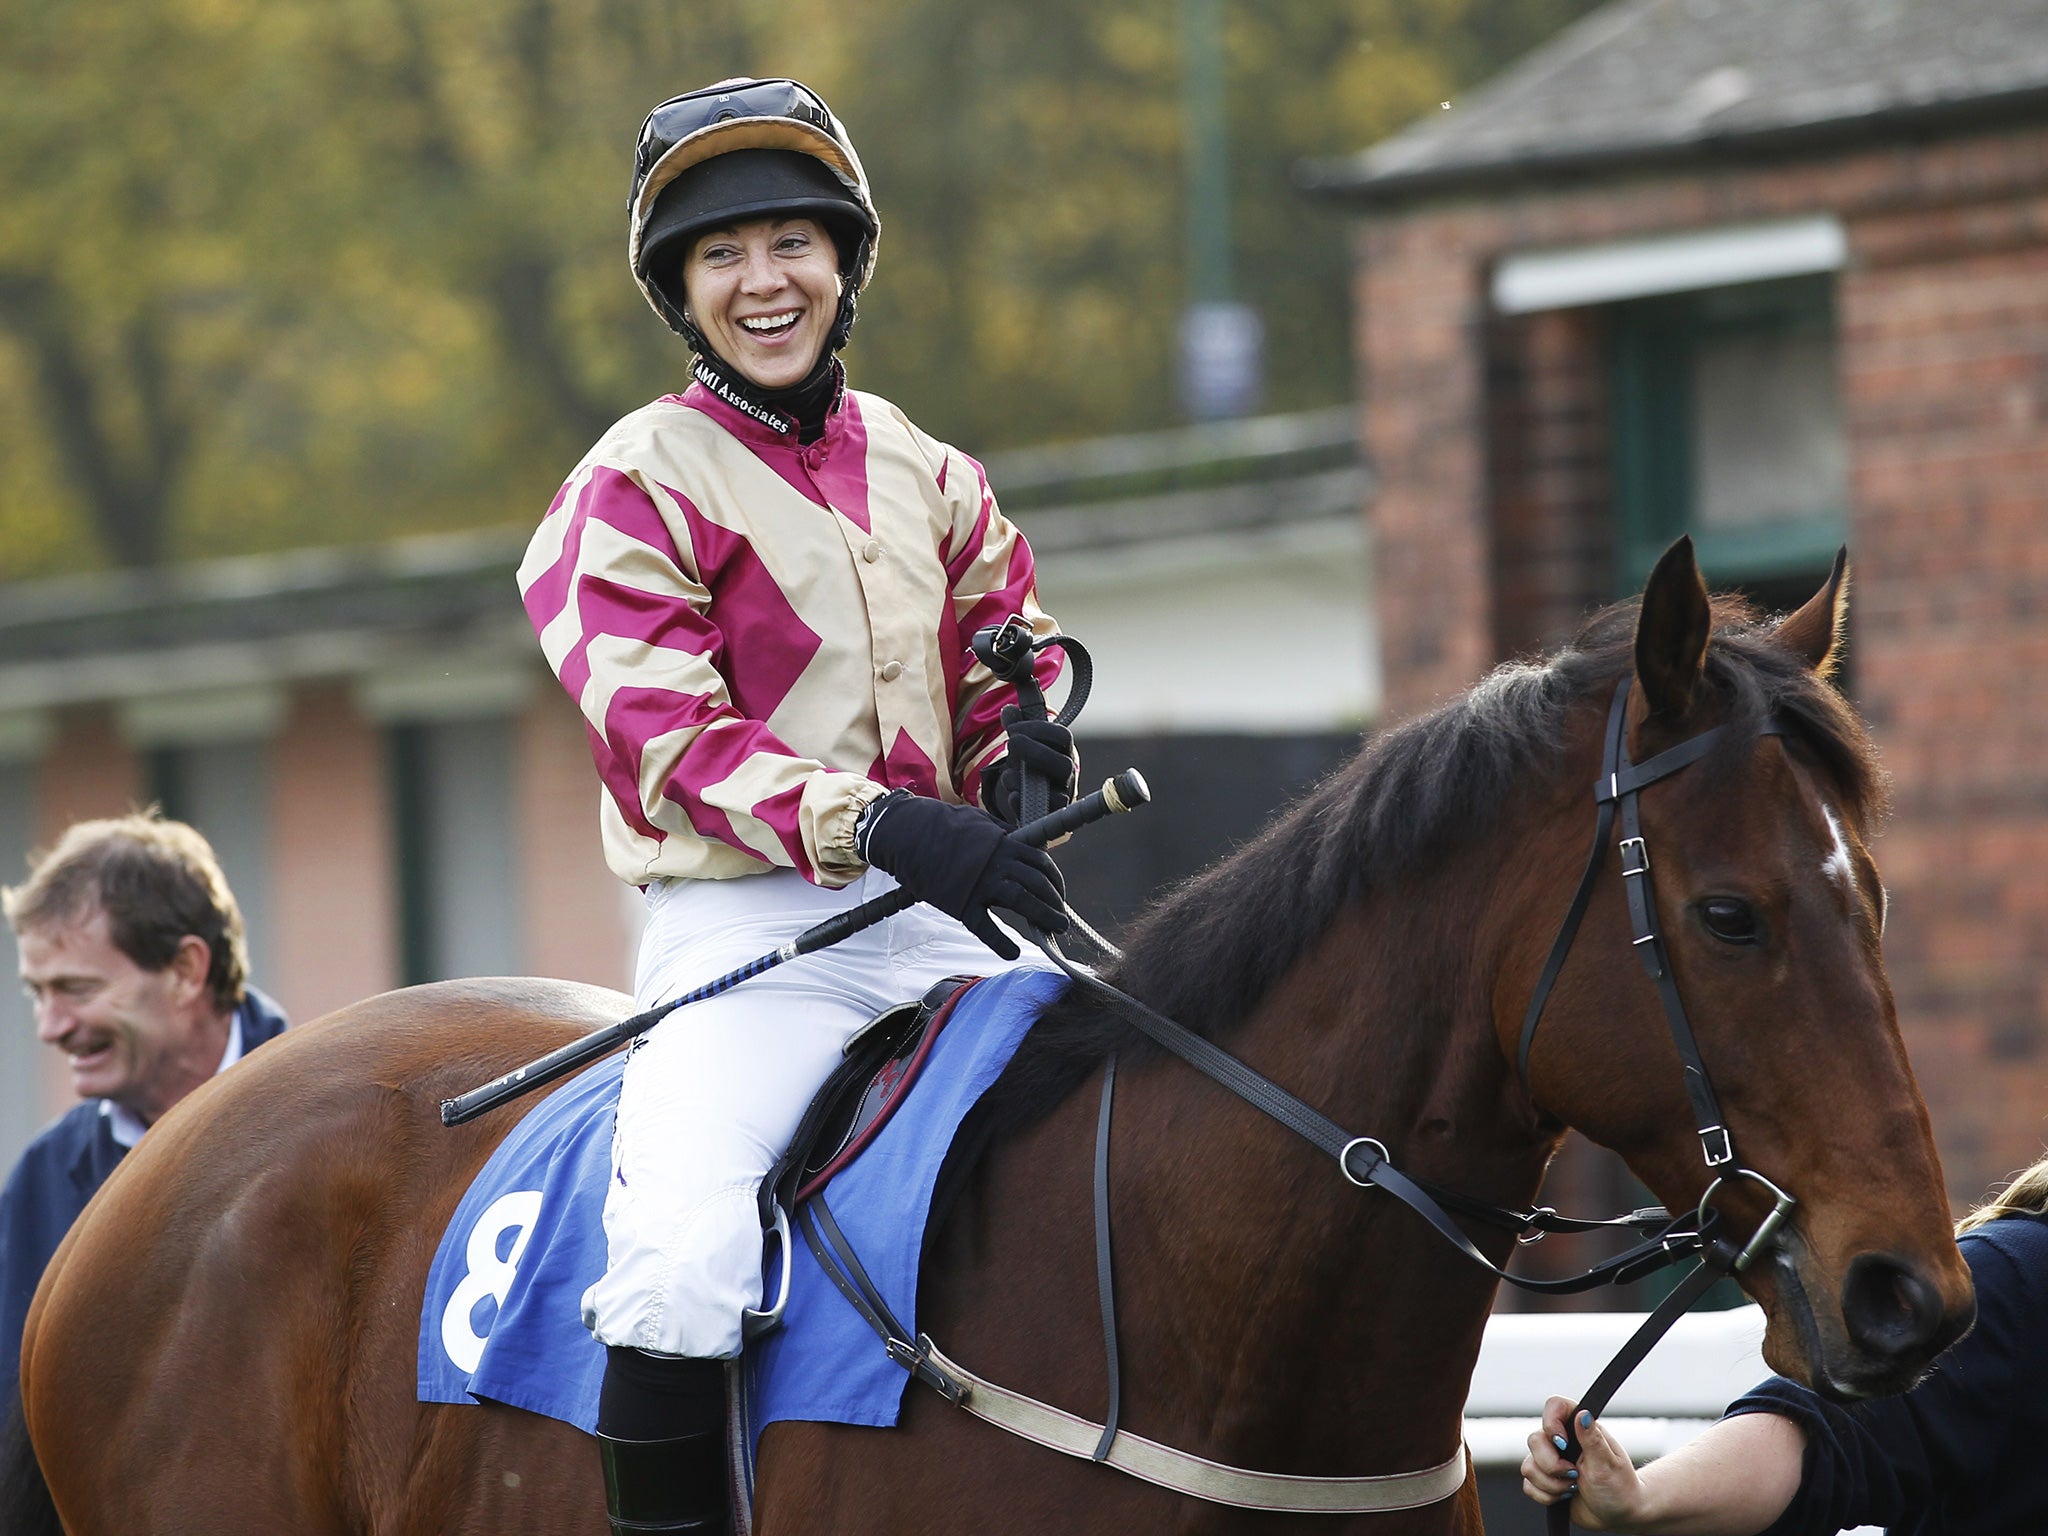 Hayley Turner is all smiles on board Elusivity at Nottingham this week